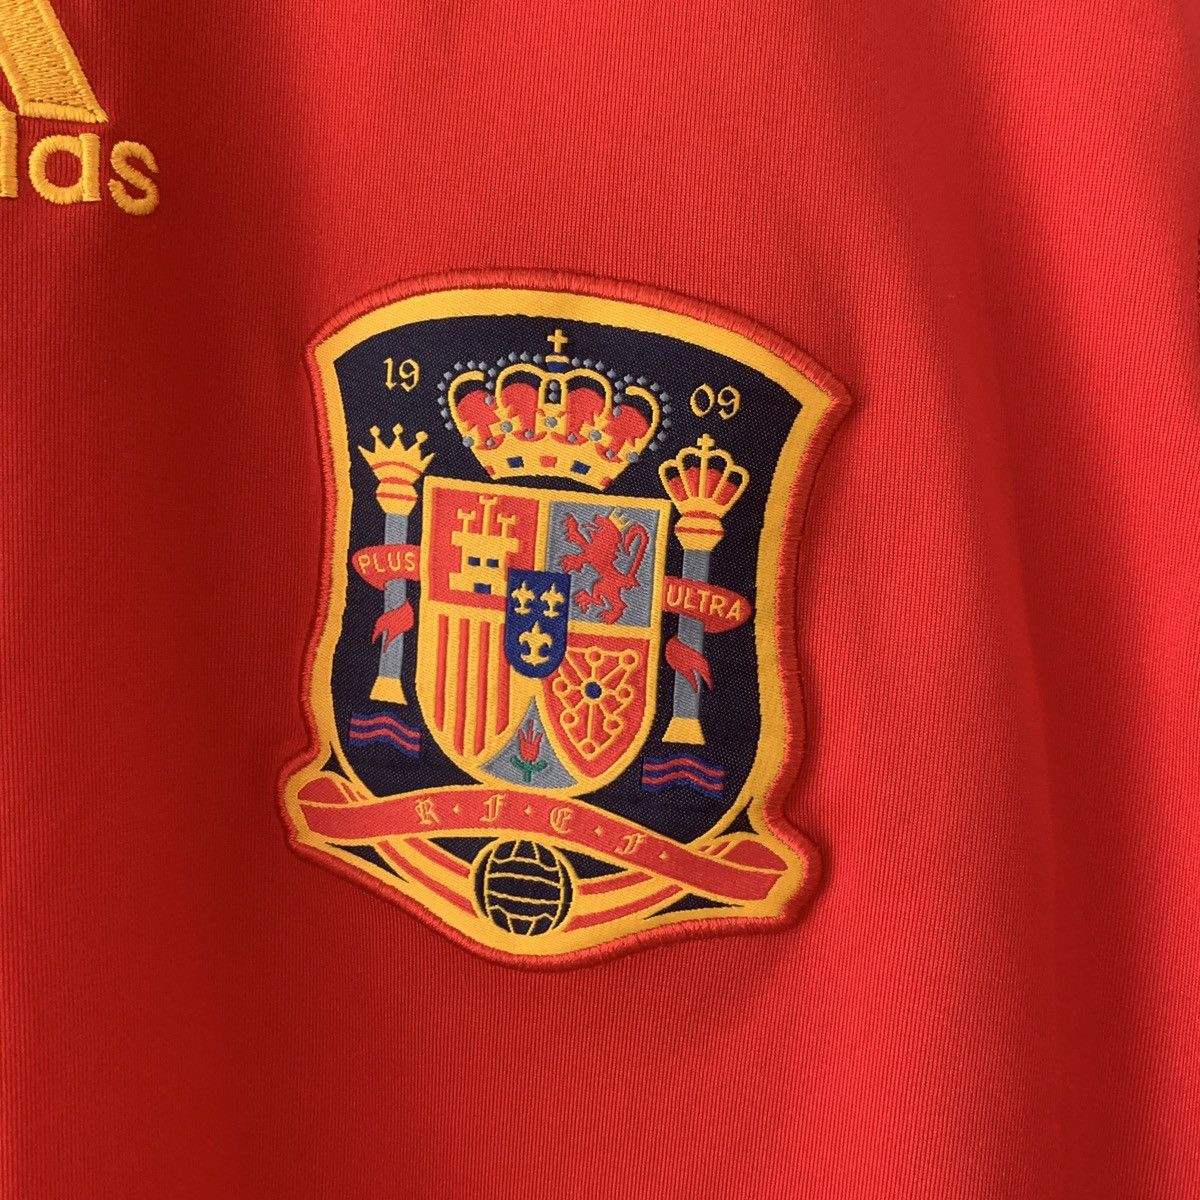 Adidas Adidas 2010 Spain RFCF Soccer Jersey World Cup Drake Style Size US M / EU 48-50 / 2 - 4 Thumbnail